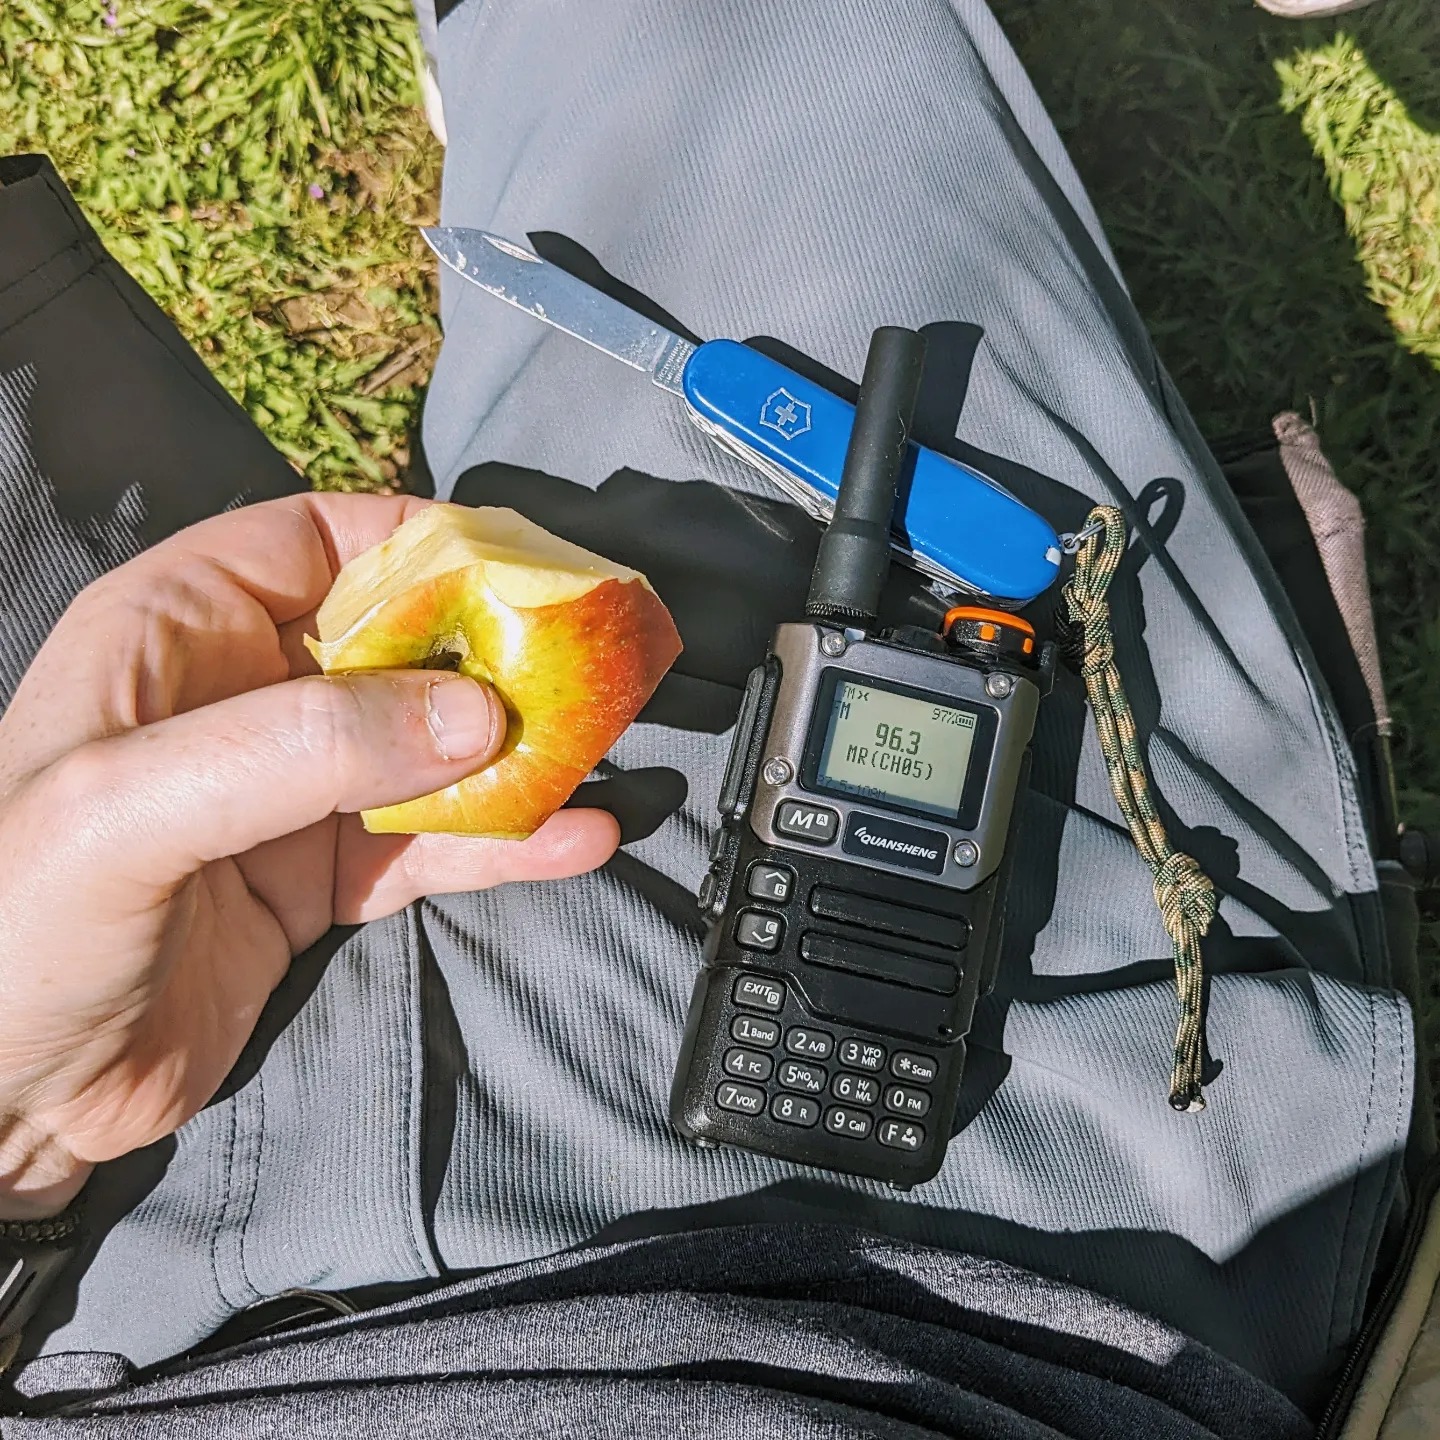 A photo of a lap with an apple, a pocket knife, and a ham radio tuned to a local FM broadcast station